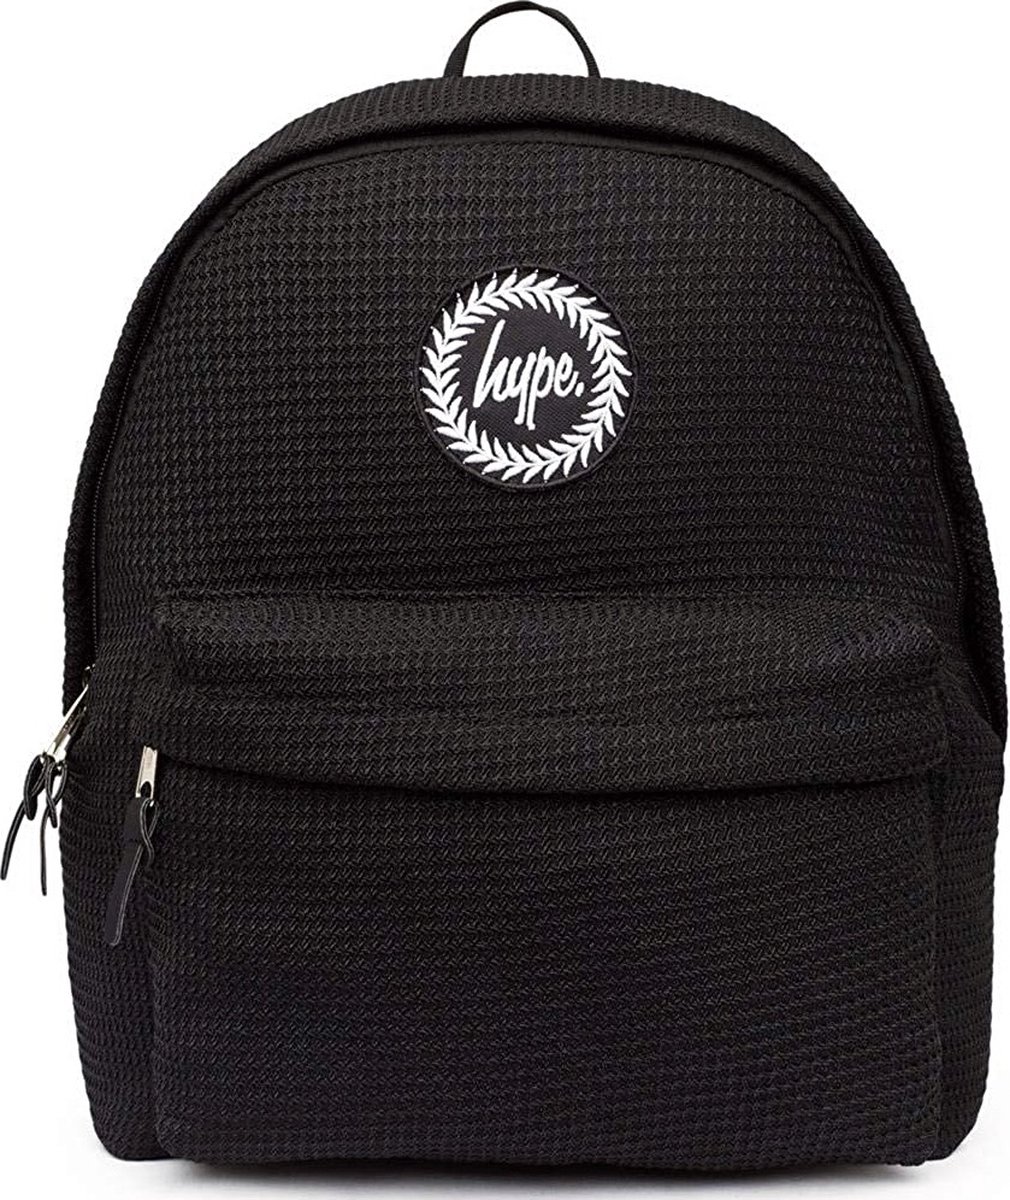 Just Hype Backpack AW180479 Unisex 18L